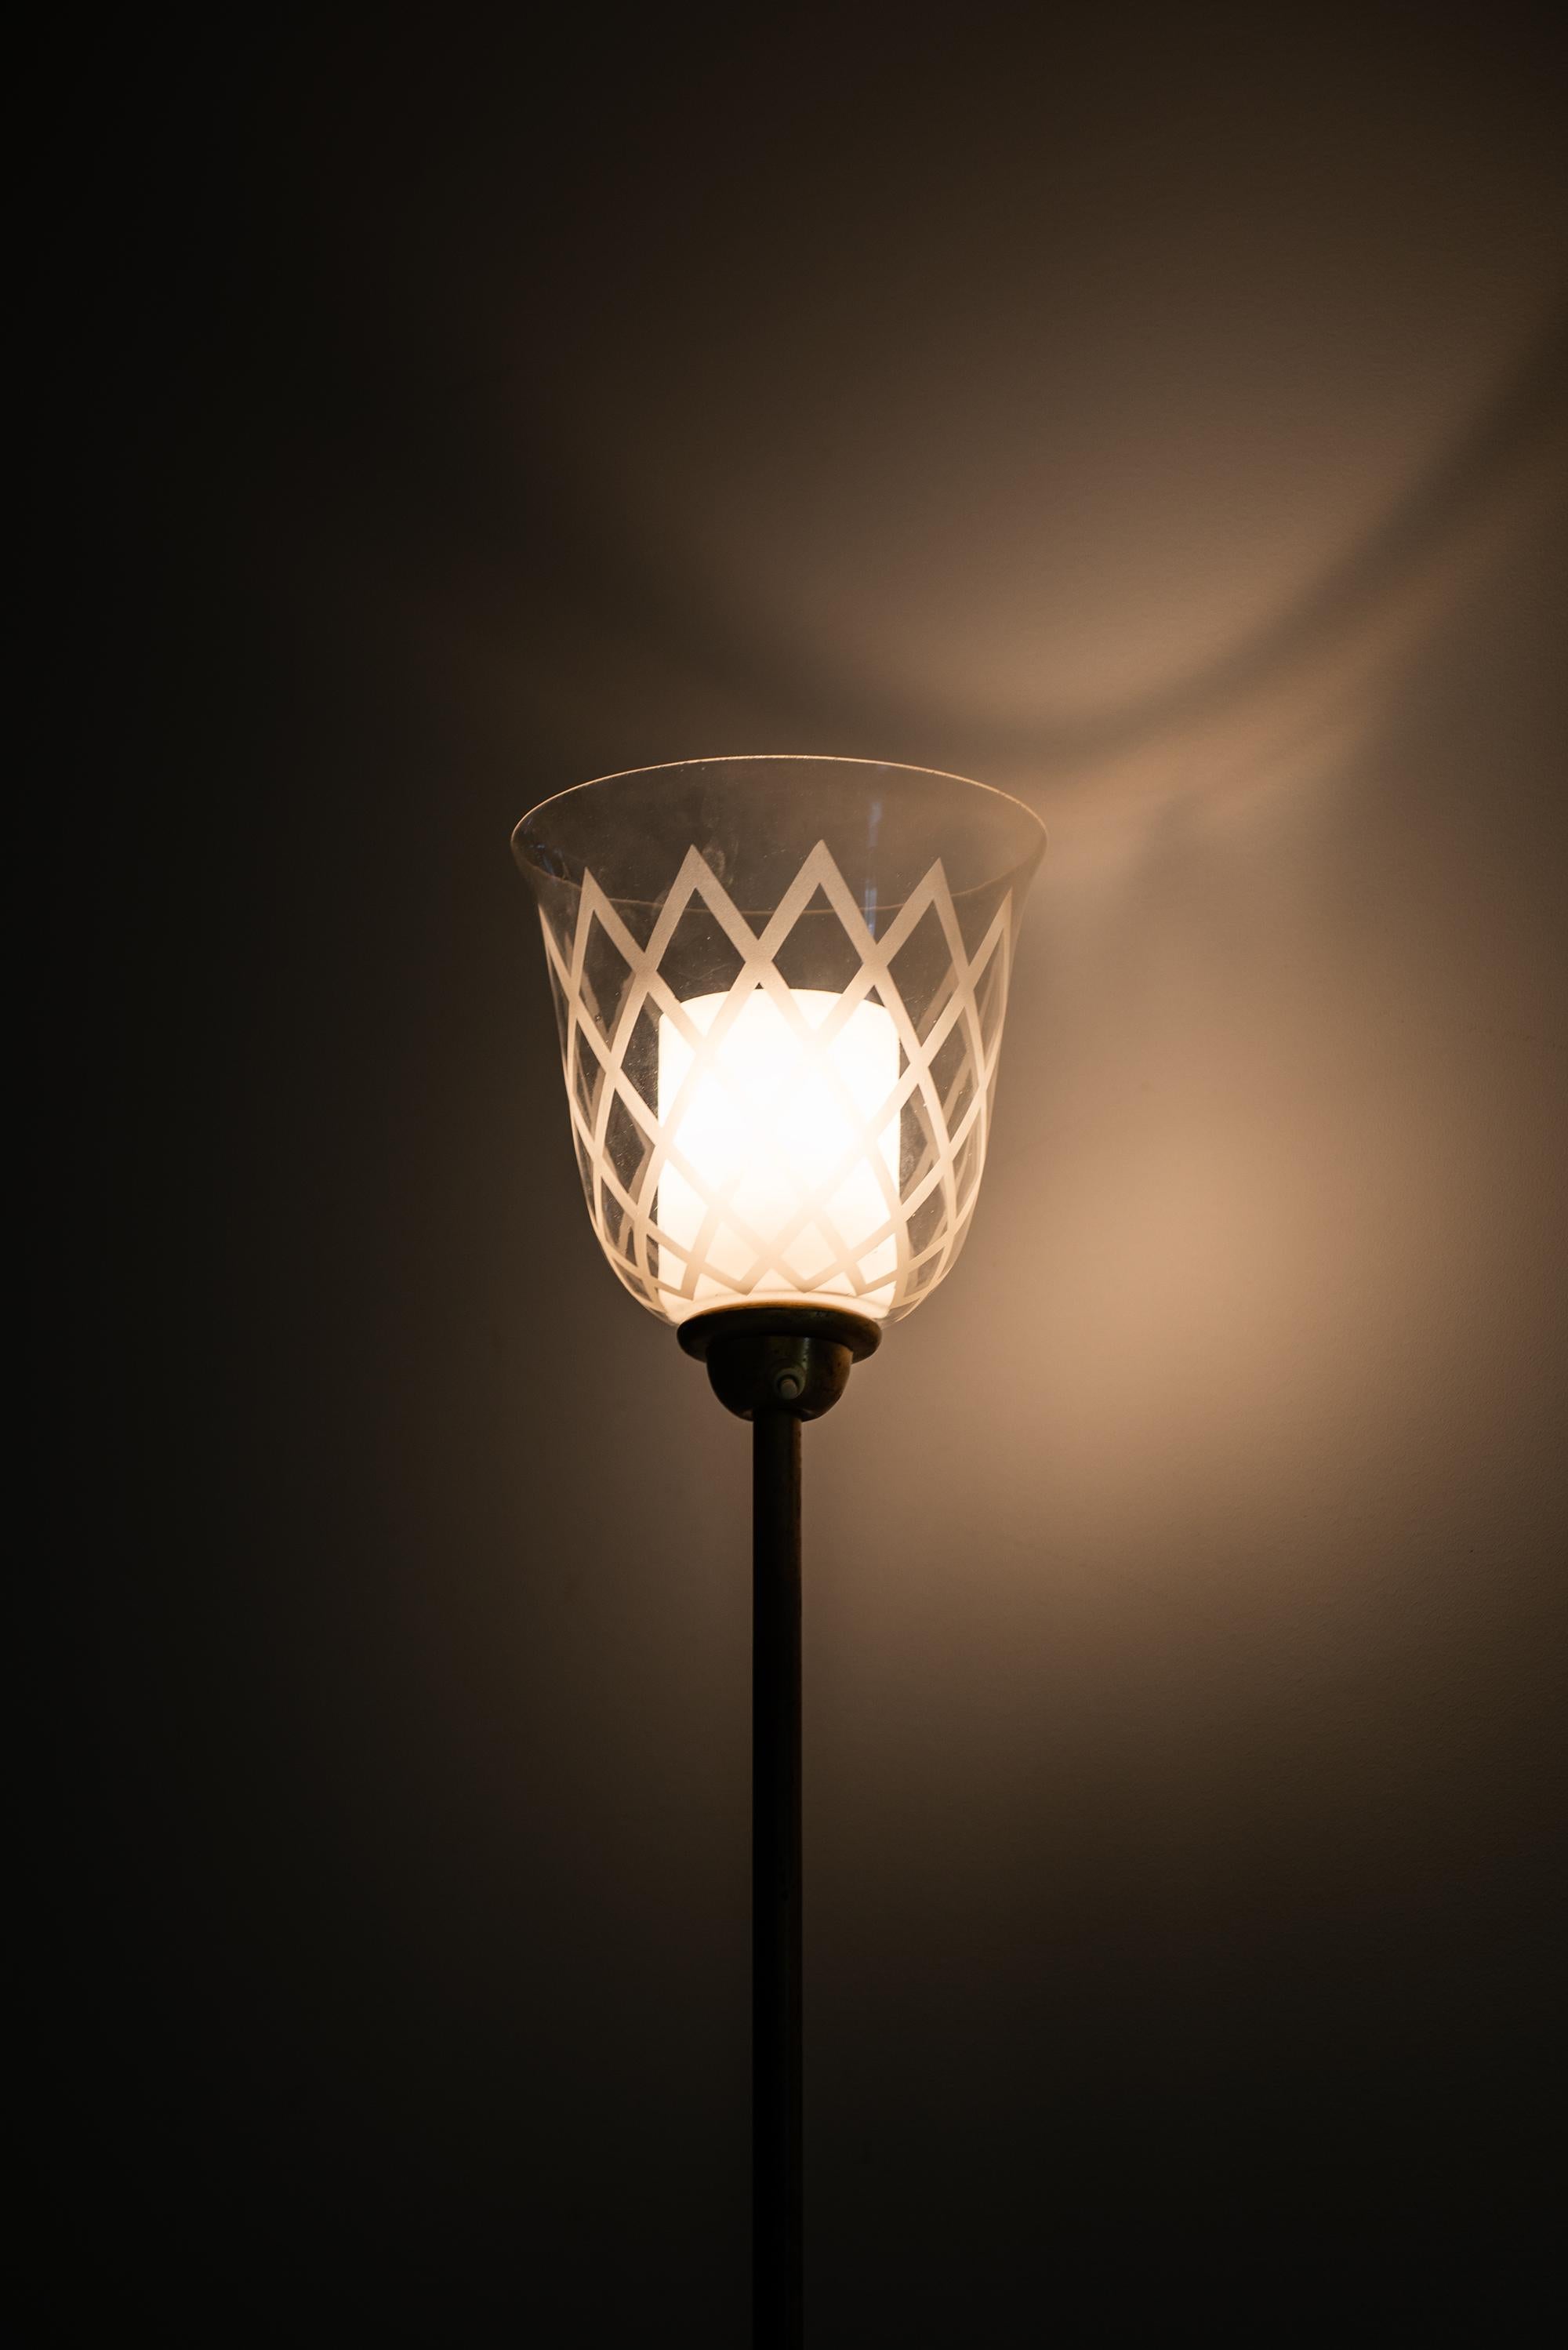 Mid-20th Century Bo Notini Floor Lamp Produced by Glössner & Co. in Sweden For Sale